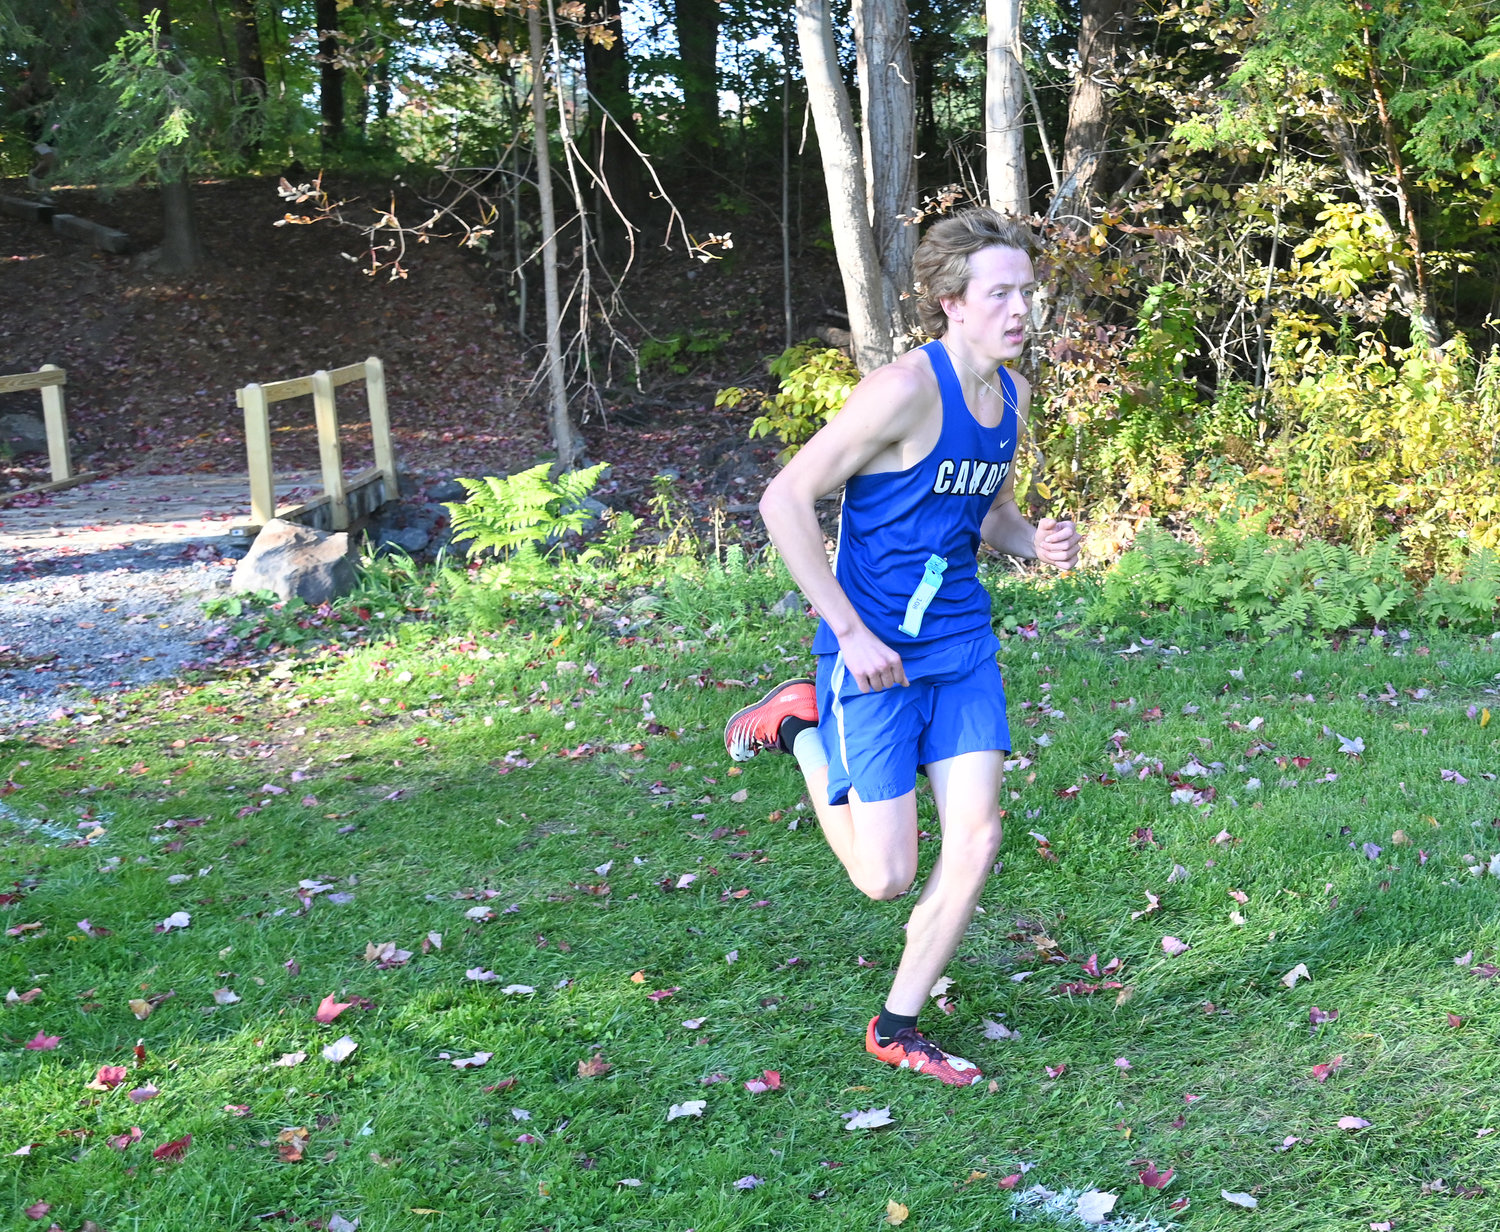 Camden cross country runner Jerome Seidl leads the varsity race at Rome Free Academy Tuesday. Seidl went on to get the win the race.